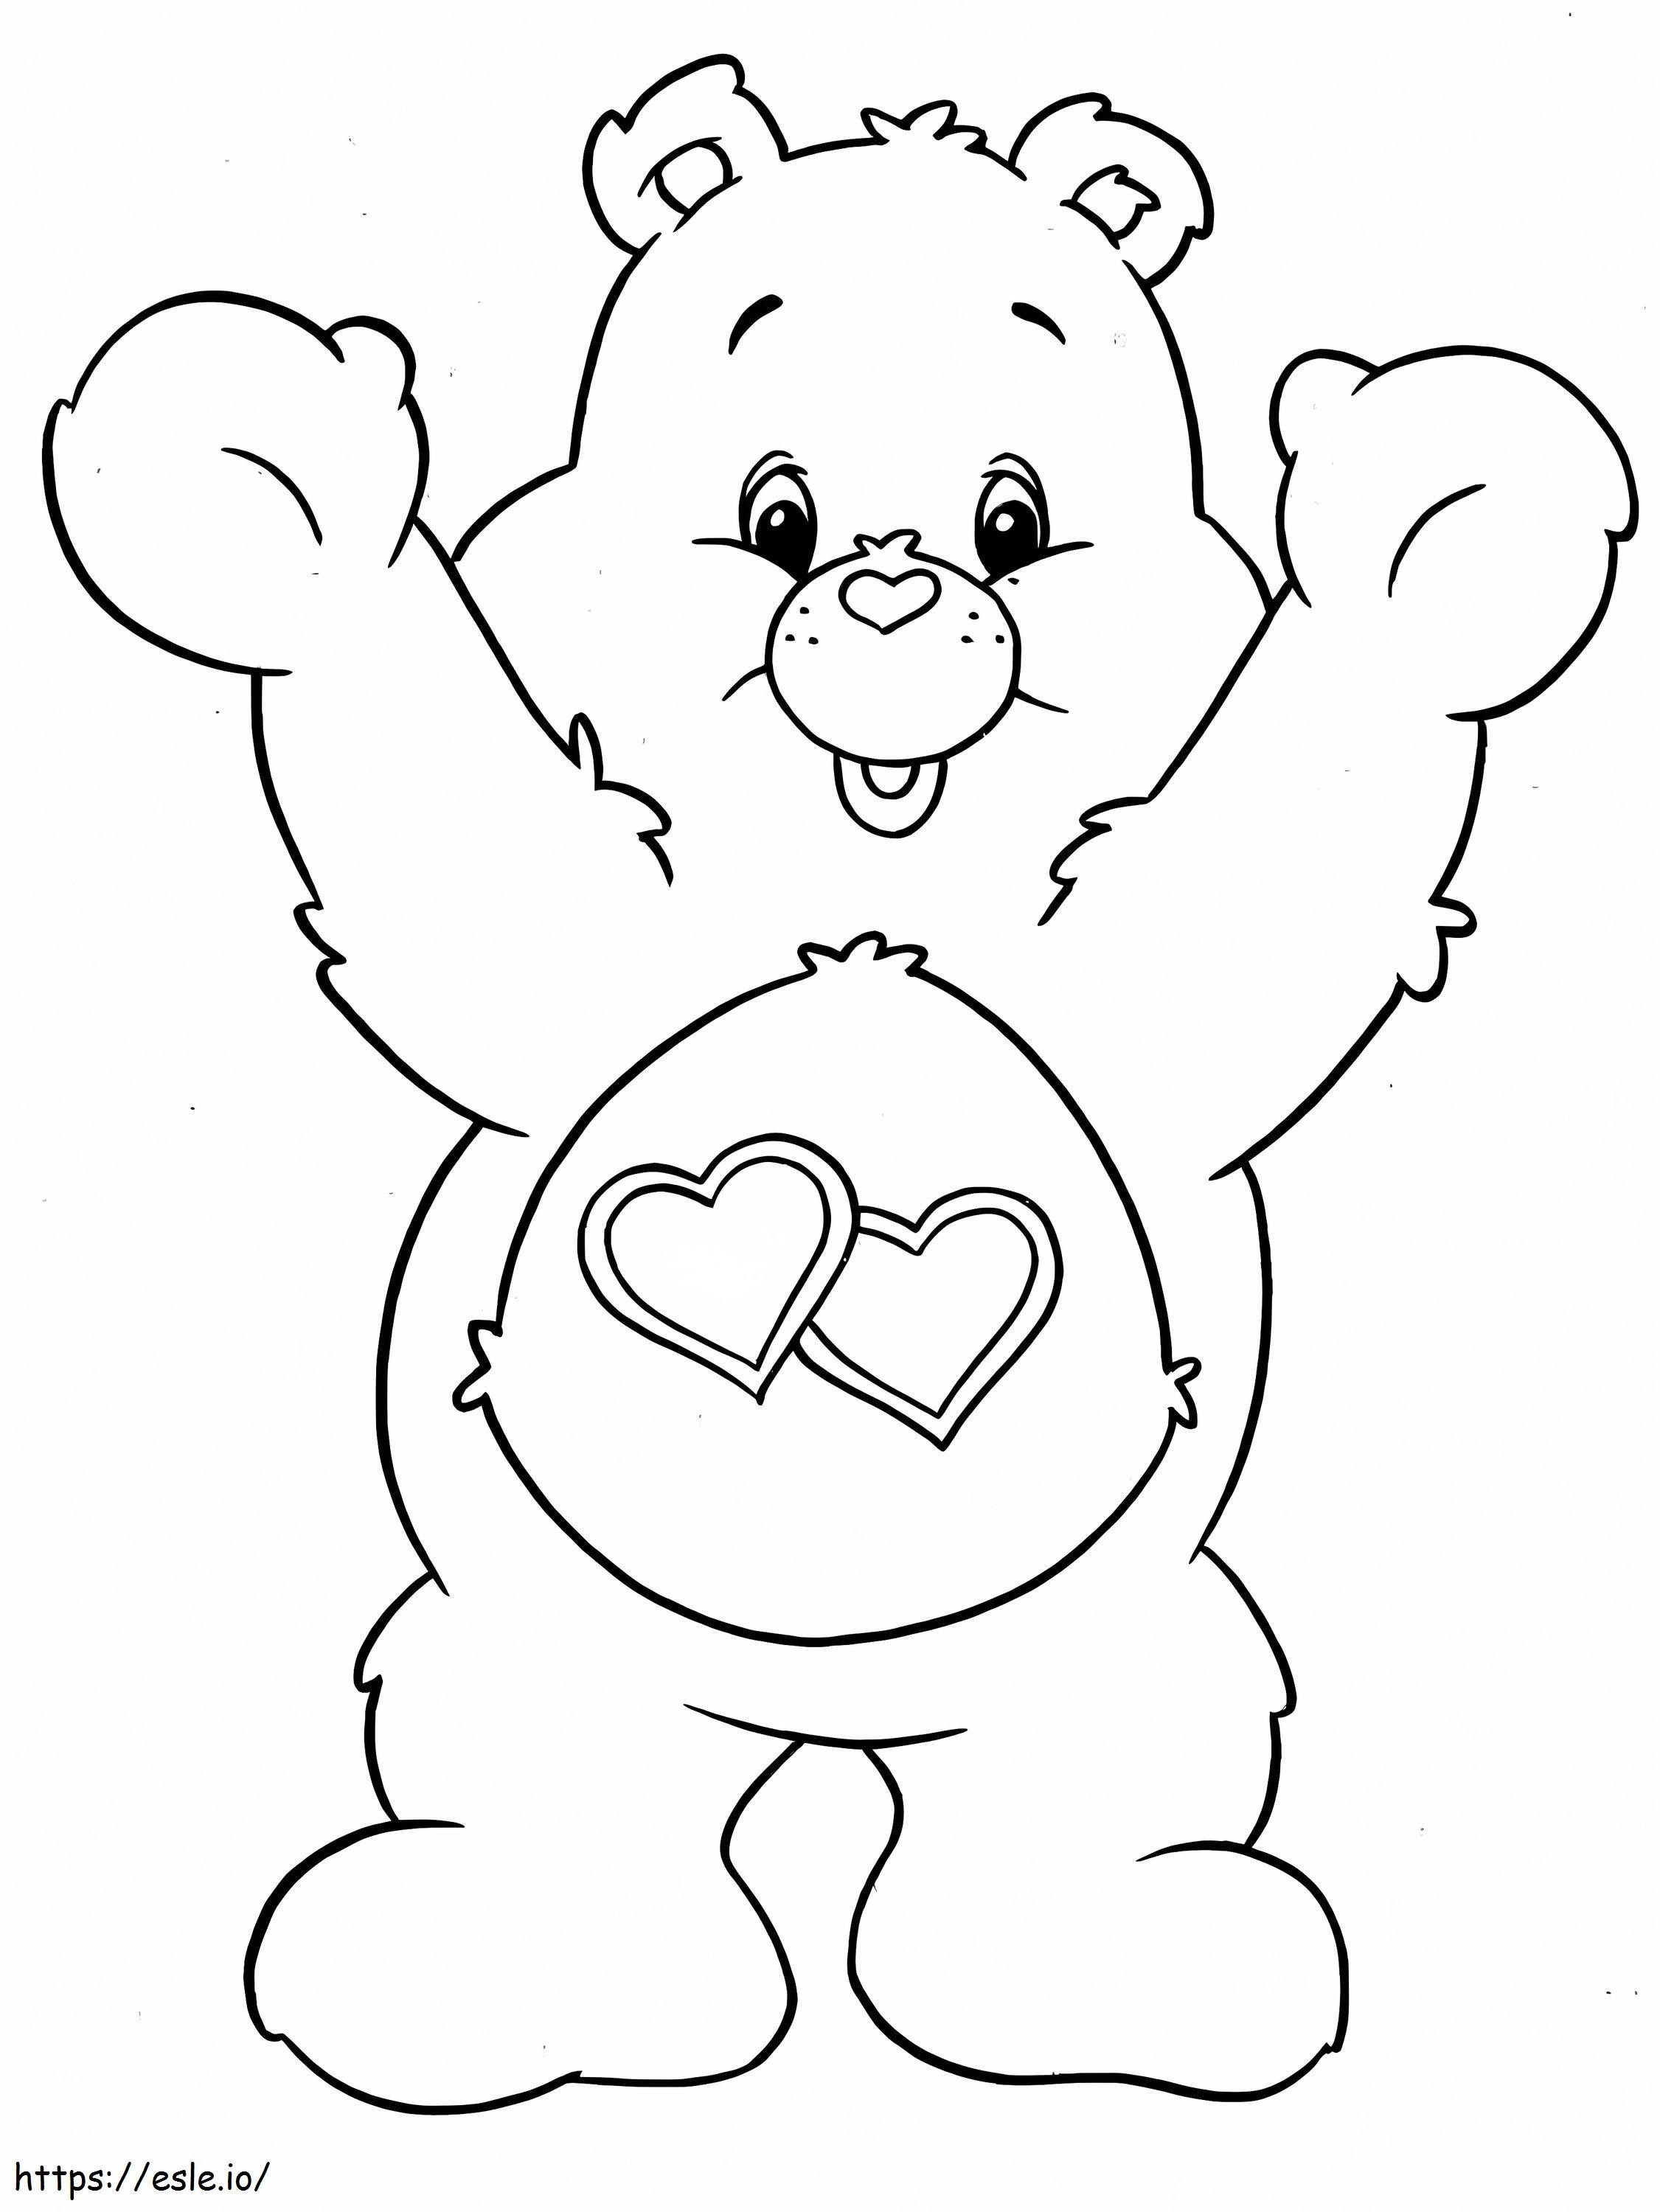 Love Much Bear coloring page